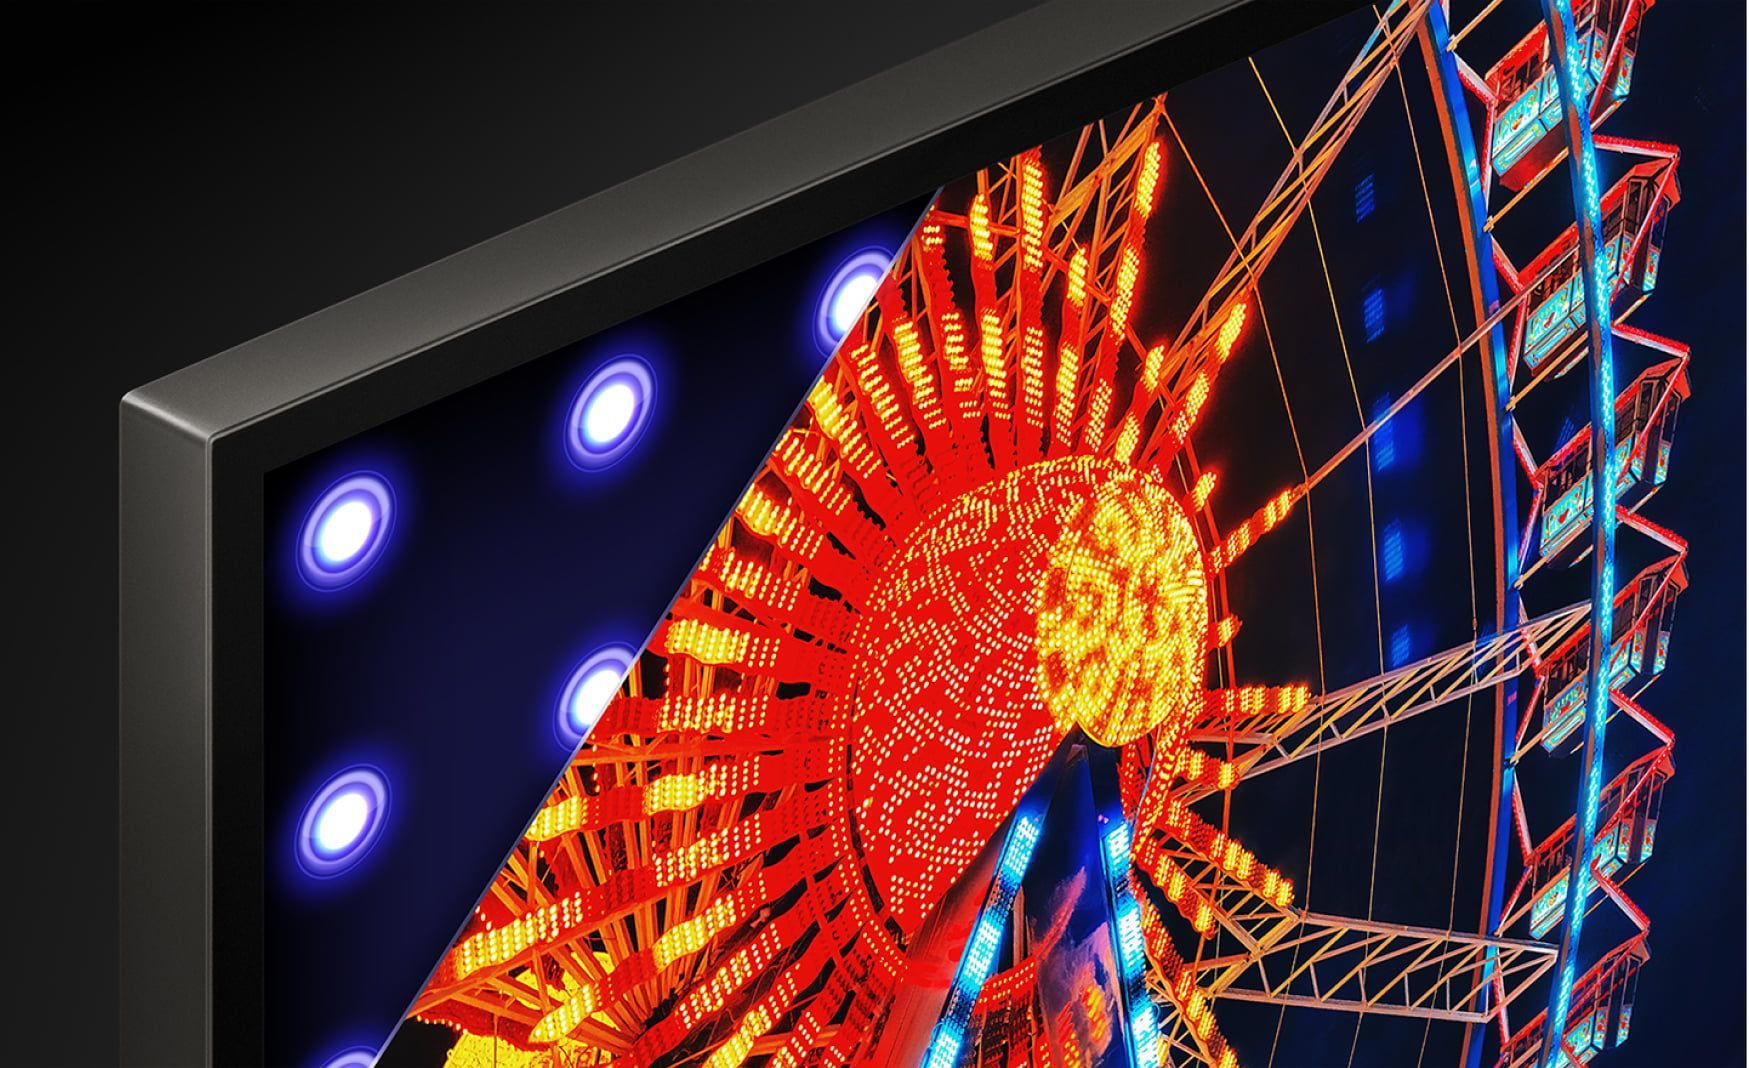 a ferris wheel is displayed on a television screen showing the sony contrast booster delivering better picture